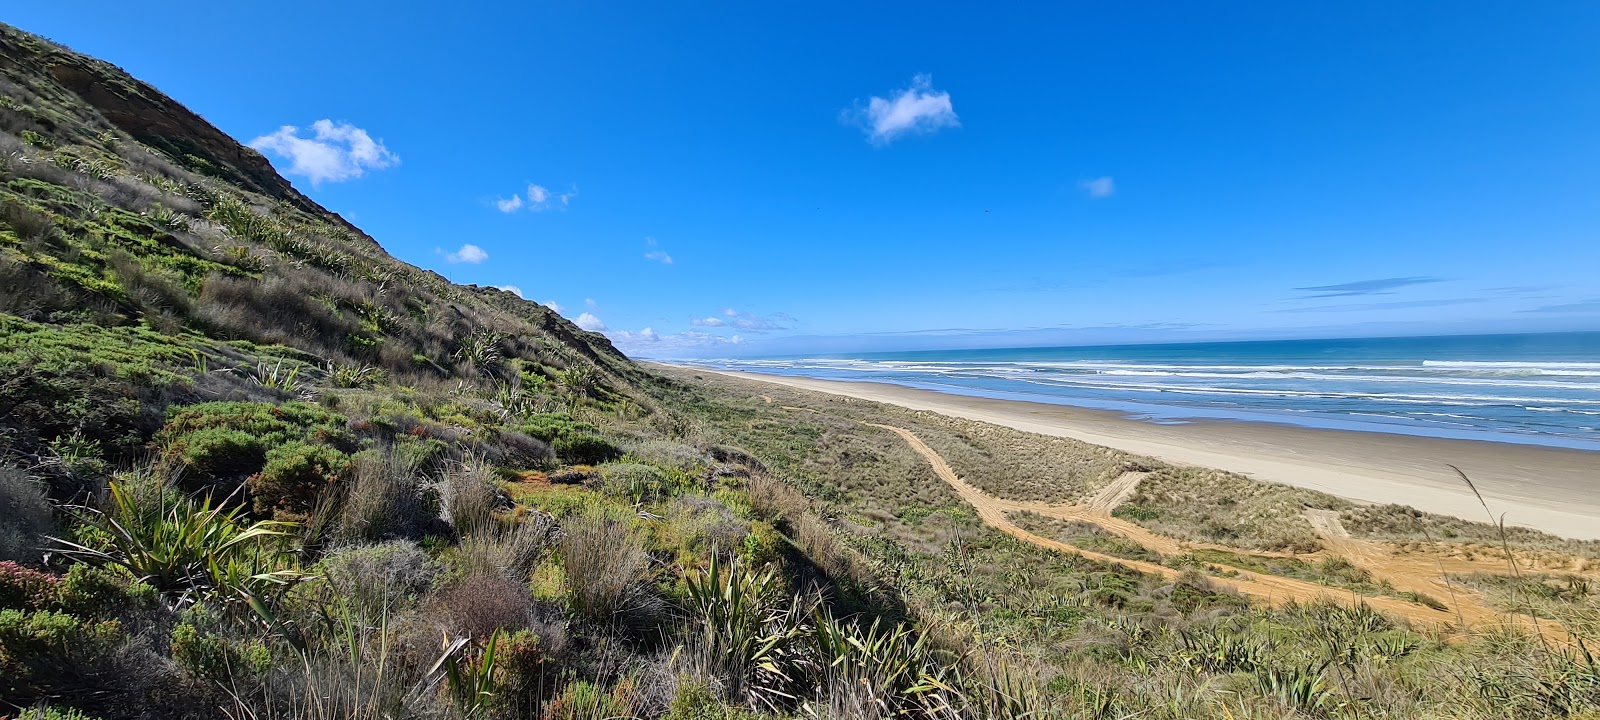 Photo of Glinks Gully Beach with long straight shore